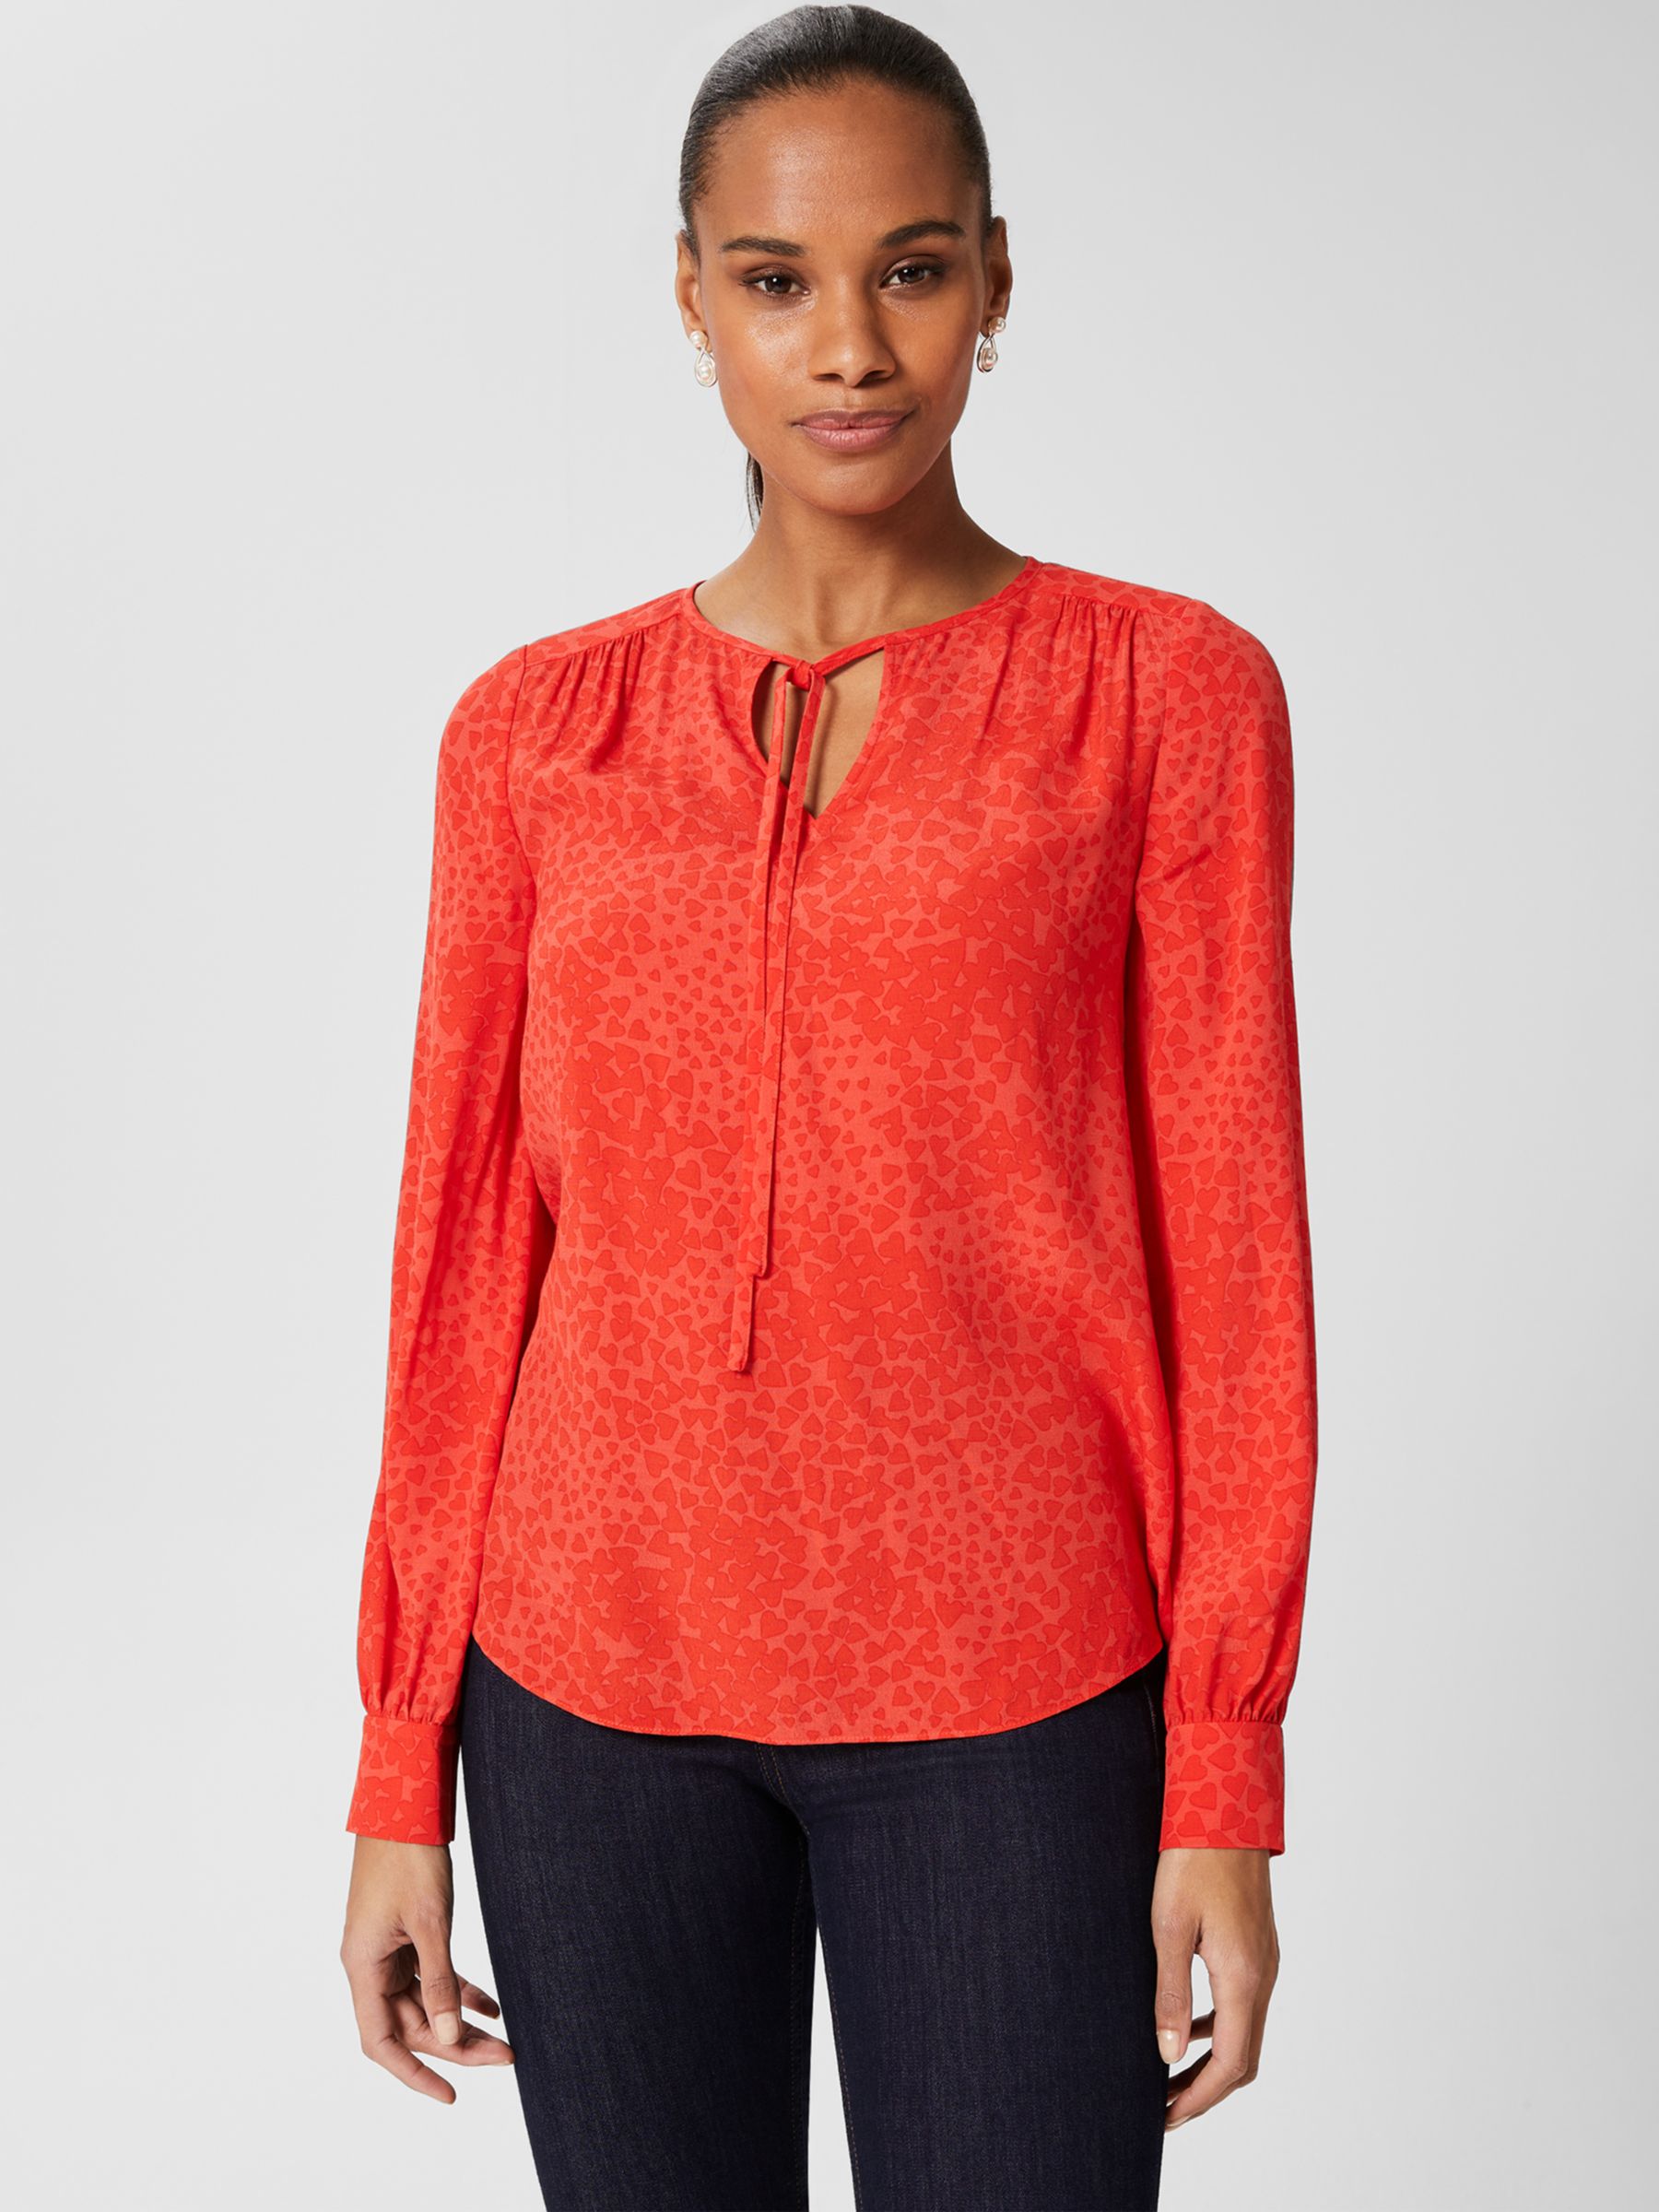 Hobbs Alison Heart Blouse, Red/Pink at John Lewis & Partners